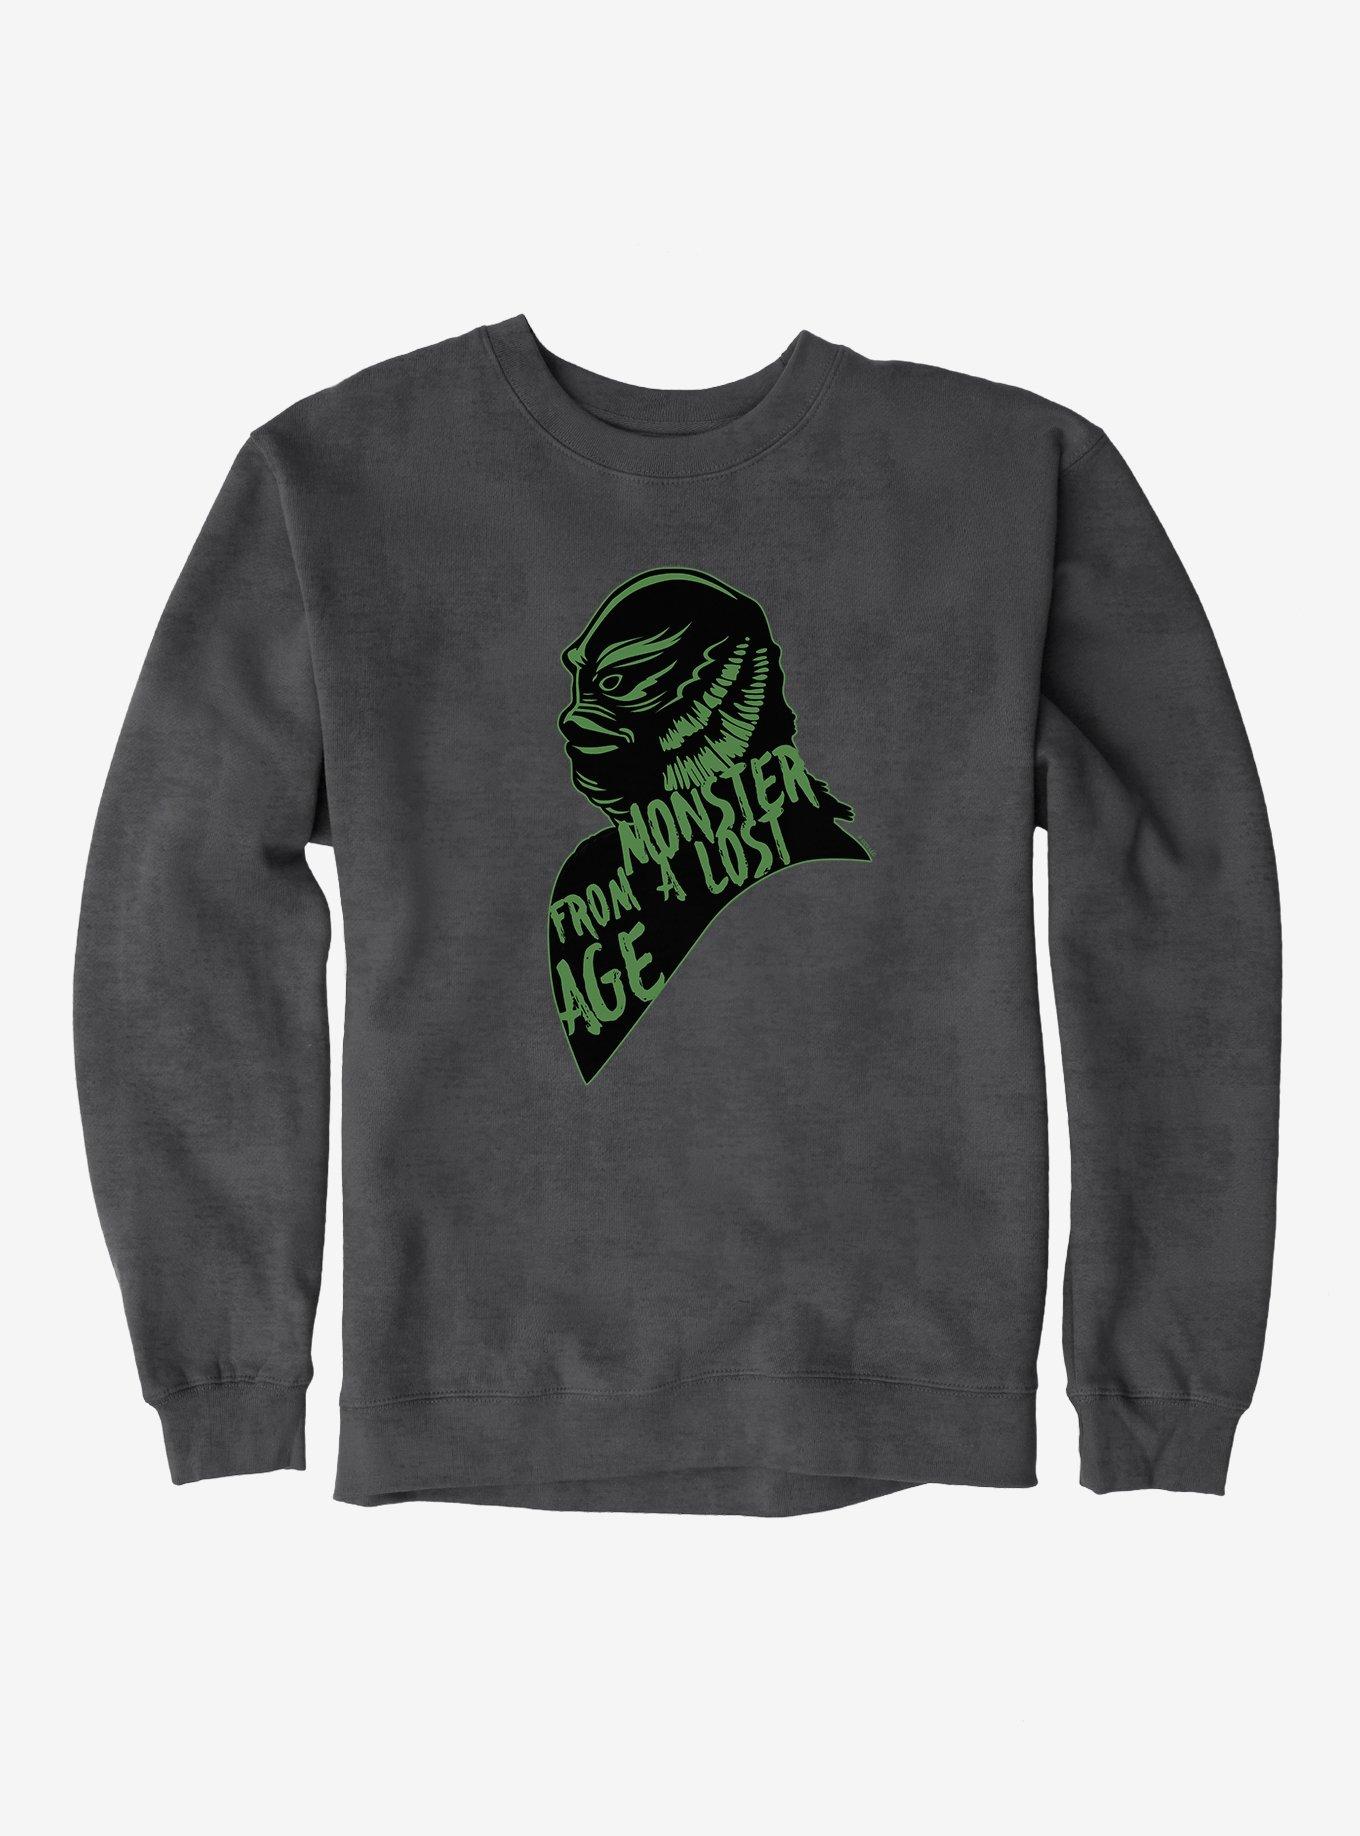 Universal Monsters Creature From The Black Lagoon Monster From A Lost Age Sweatshirt, CHARCOAL HEATHER, hi-res